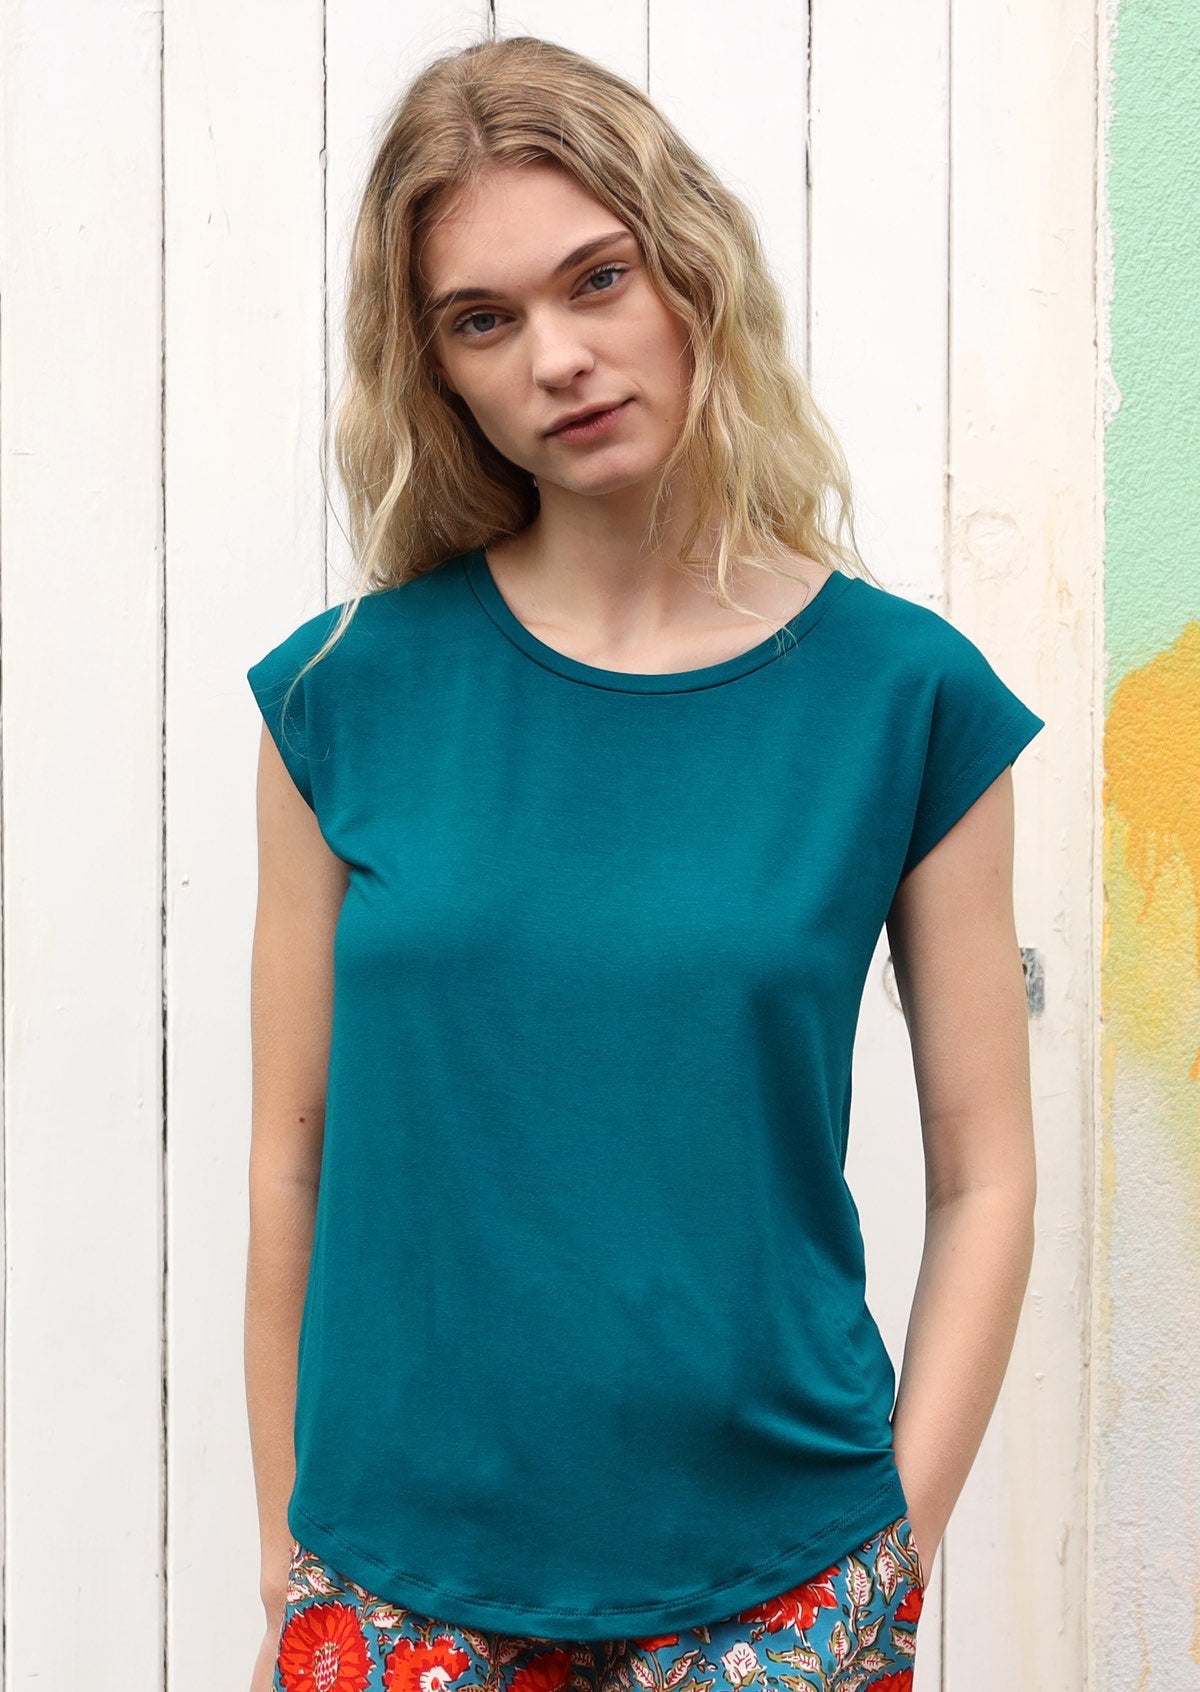 Woman wearing a soft flattering fit teal rayon jersey t-shirt with red pants.